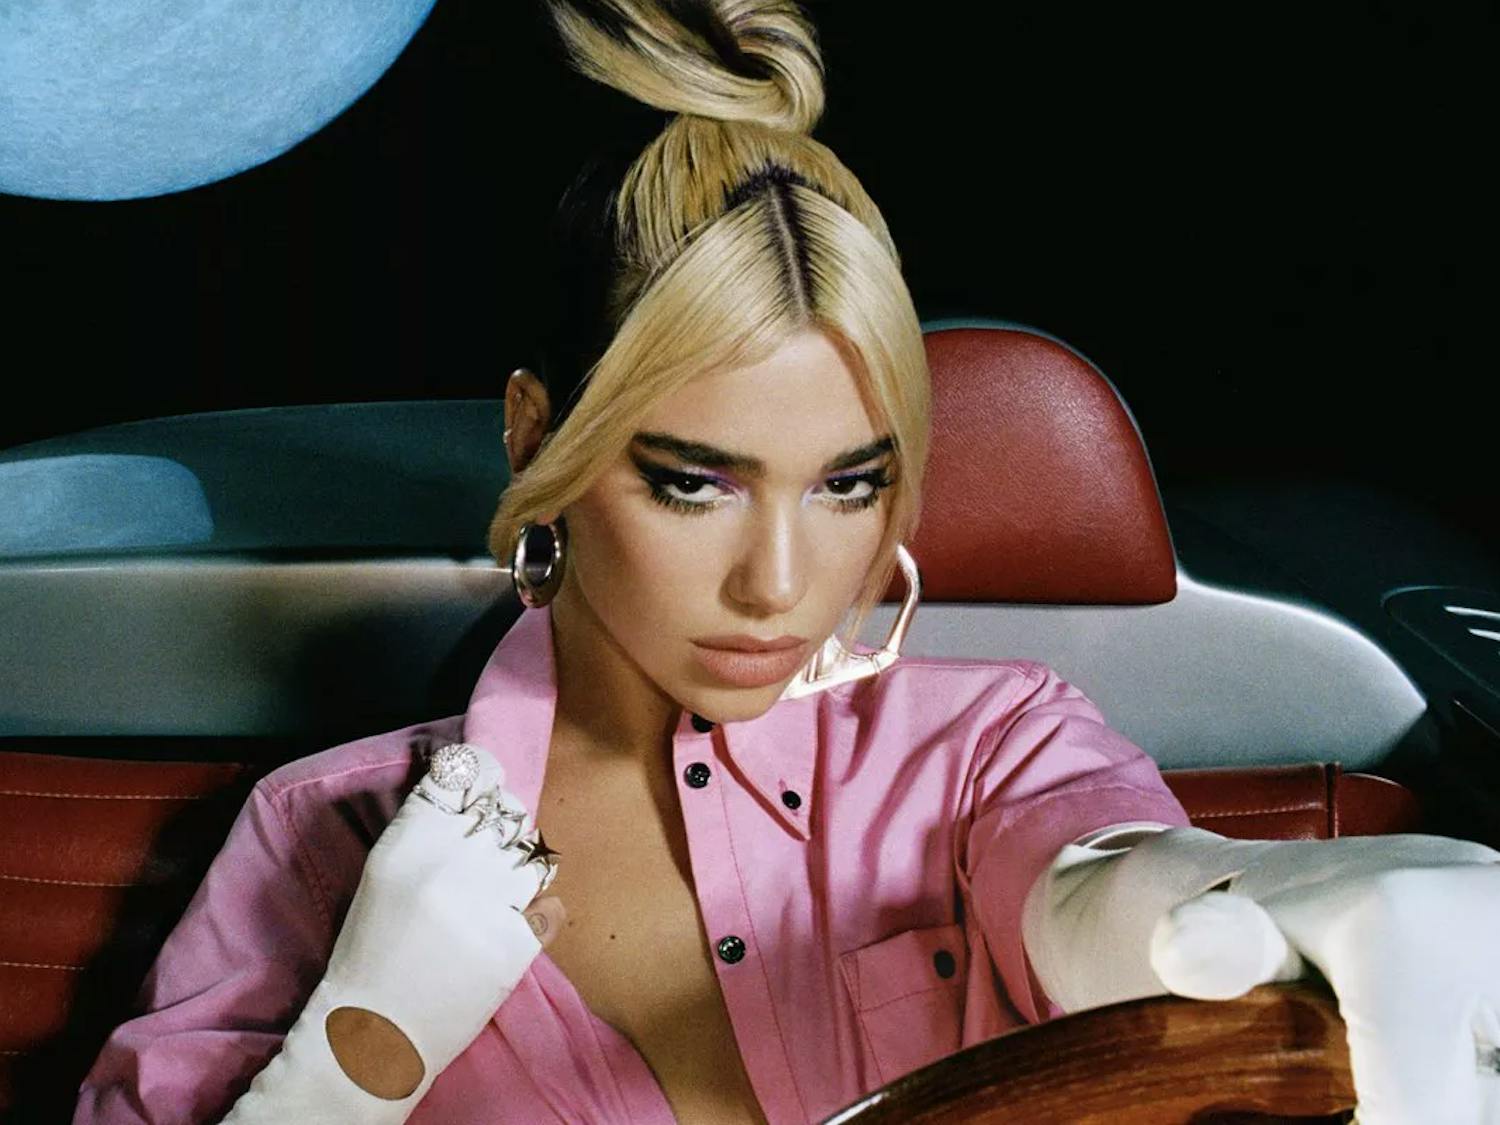 Dua Lipa released her sophomore album “Future Nostalgia” ahead of its slated release date after it leaked online.